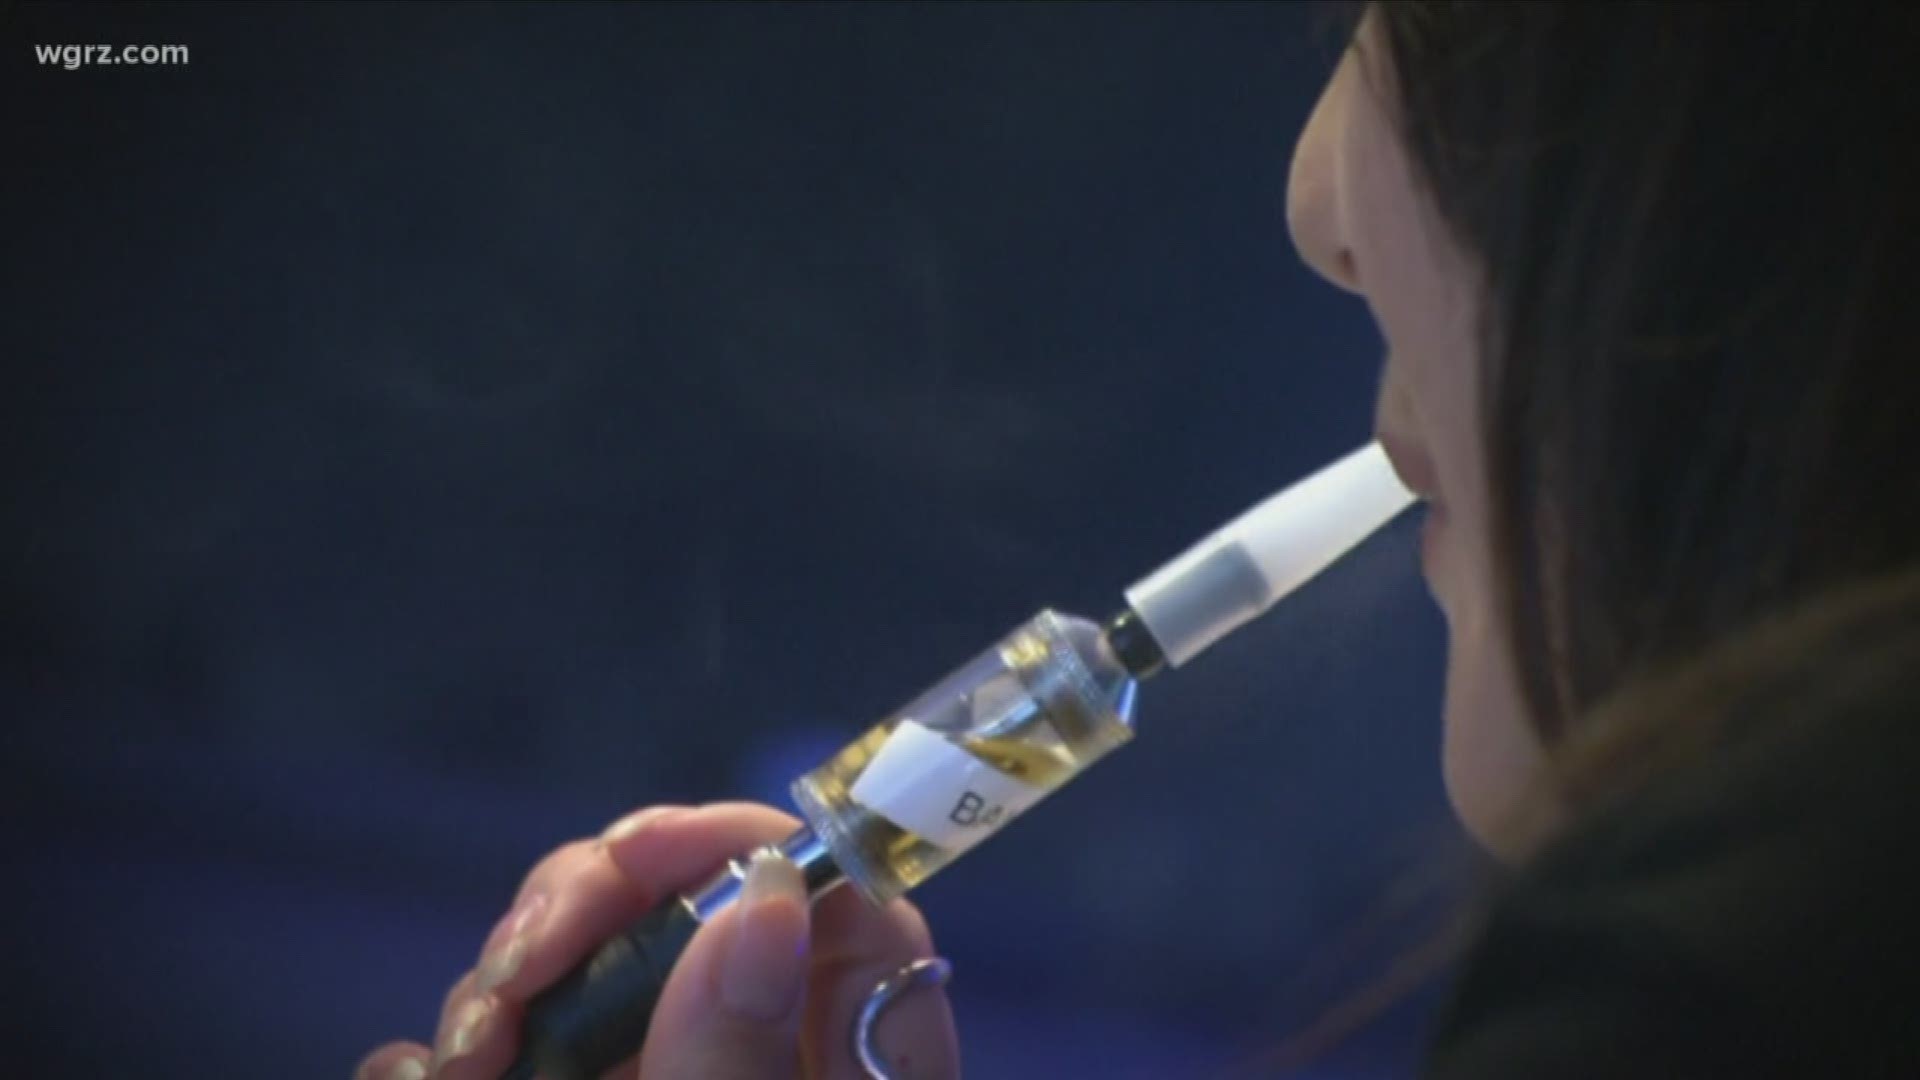 governor signed a law today... that requires health insurers here to cover methods used to quit vaping... the same as they do for quitting tobacco.